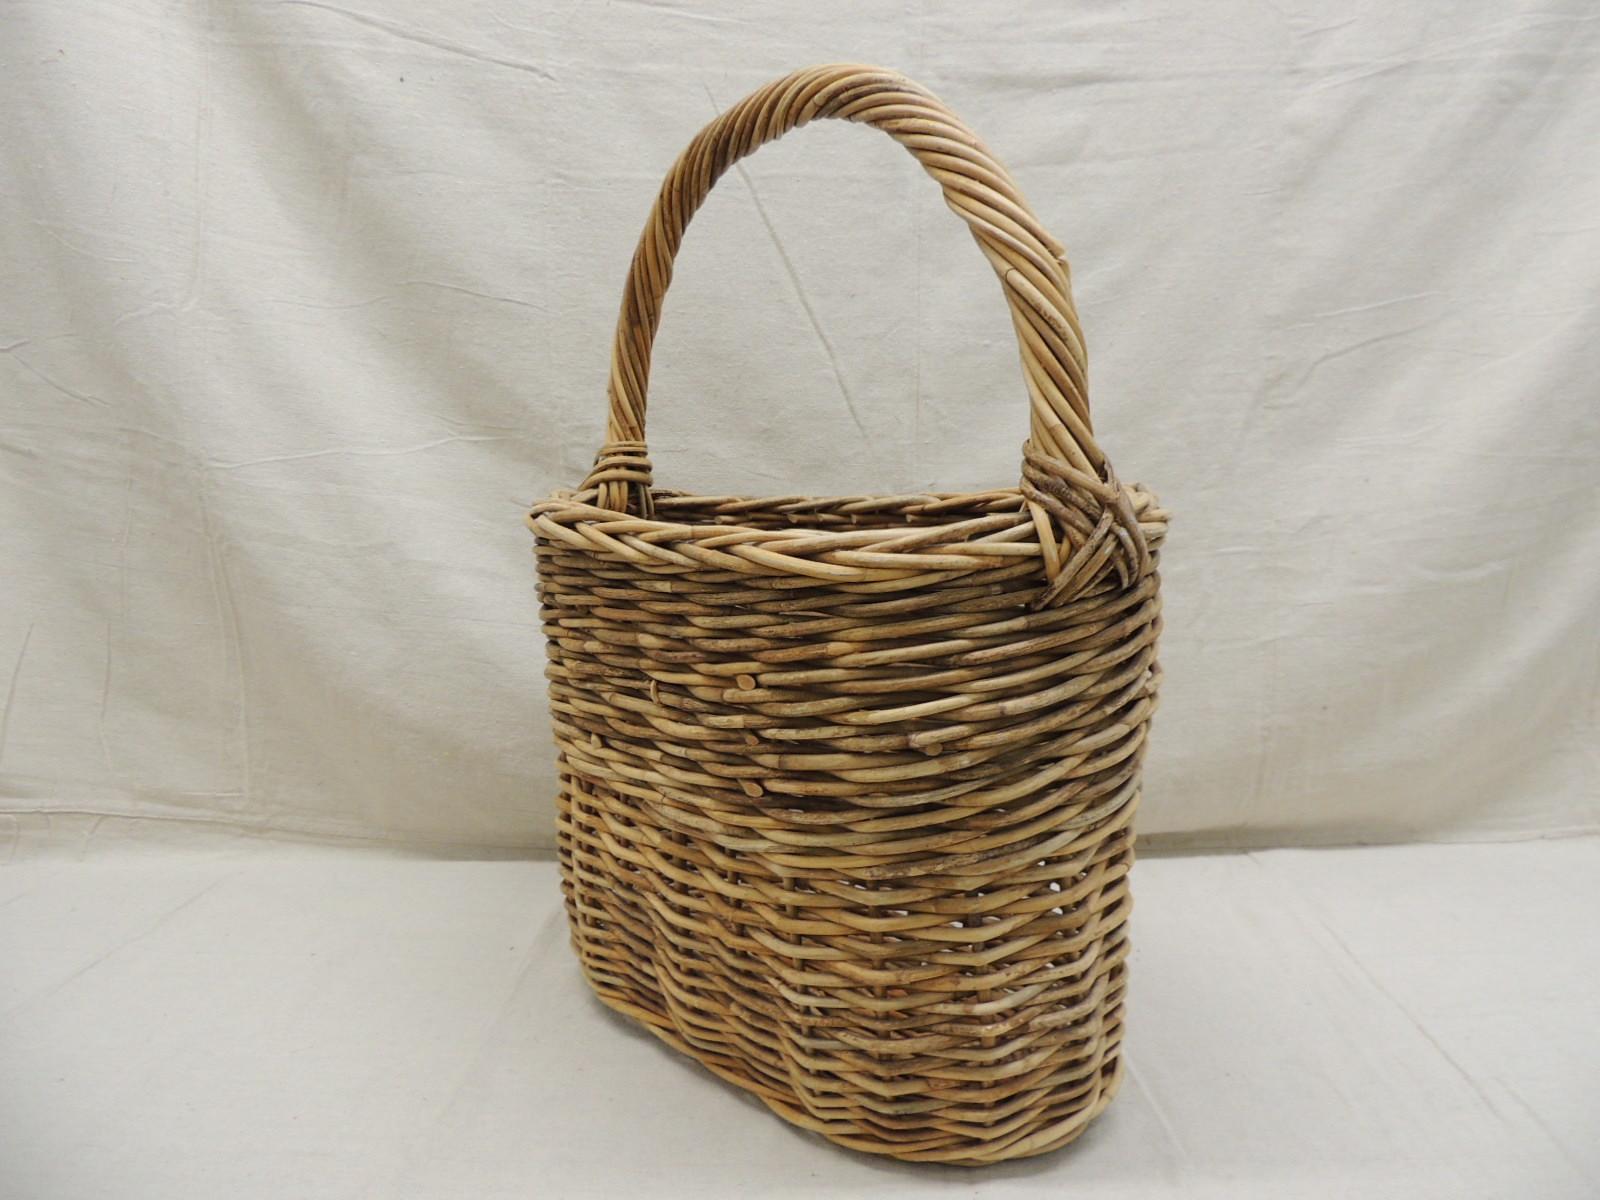 Large vintage farmers willow basket with handle
Also a magazine stand or rack
Size: 19